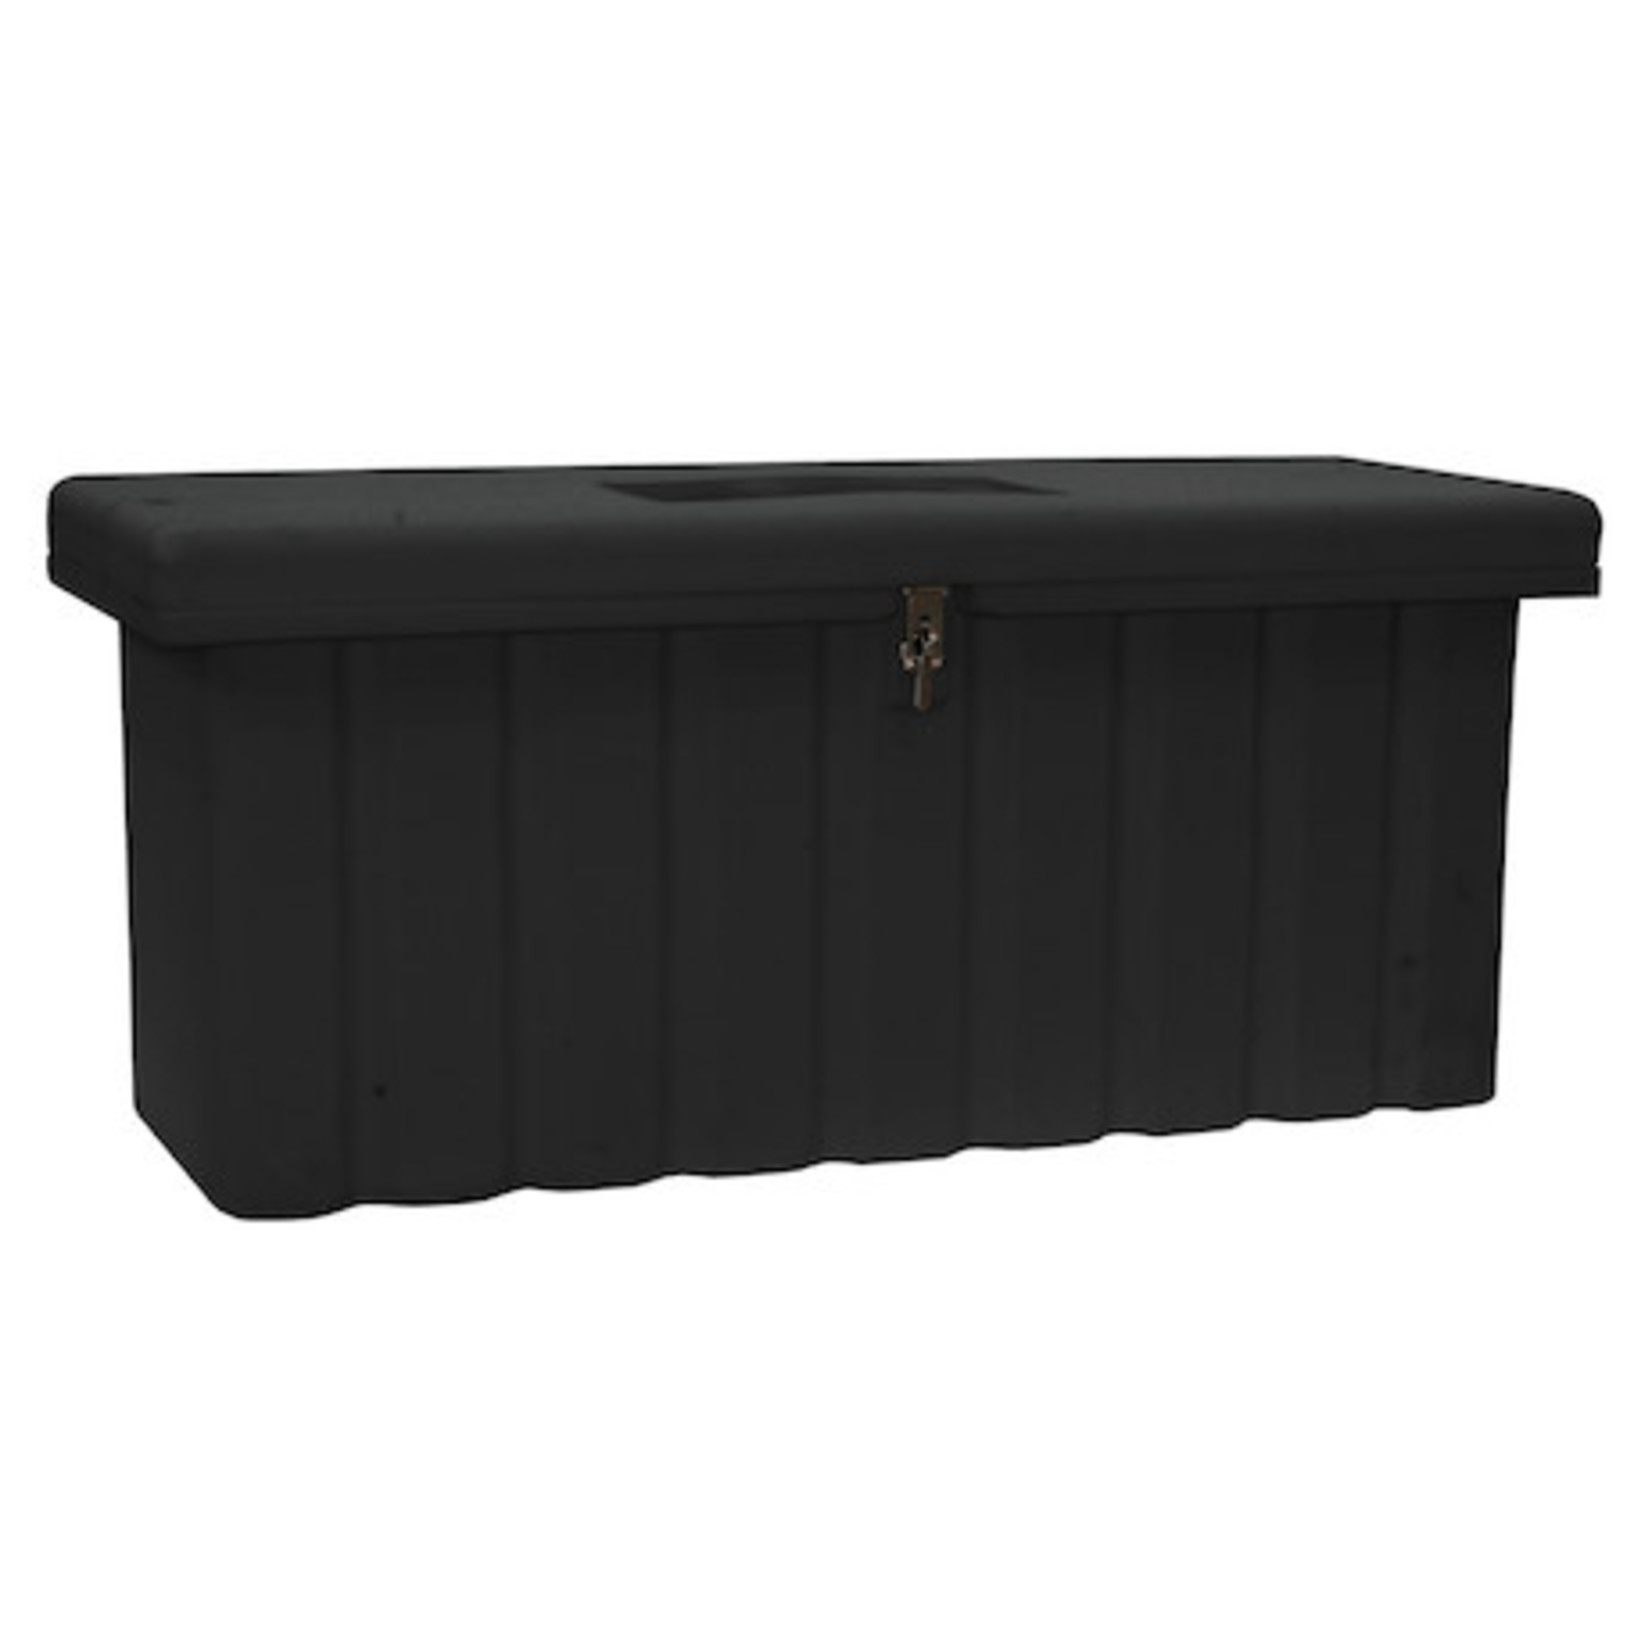 Buyers Products Company Black Poly All-Purpose Chest Series